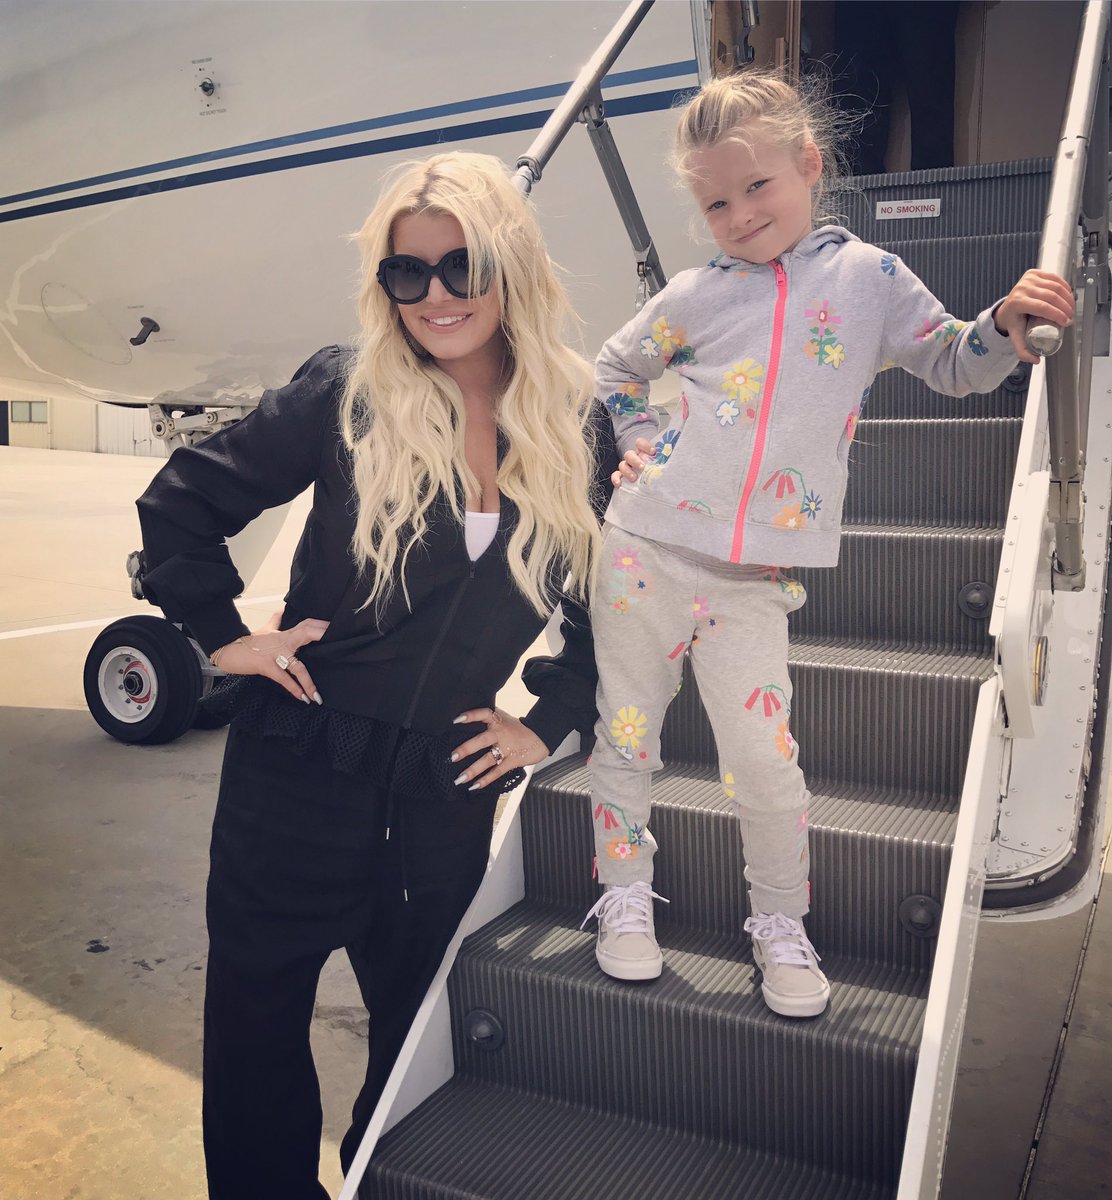 Wheels up to Waco! ✈️#wheelsandheels #MAXIDREW (Ace was too shy for the pic ????) https://t.co/YWJbnGRxIV